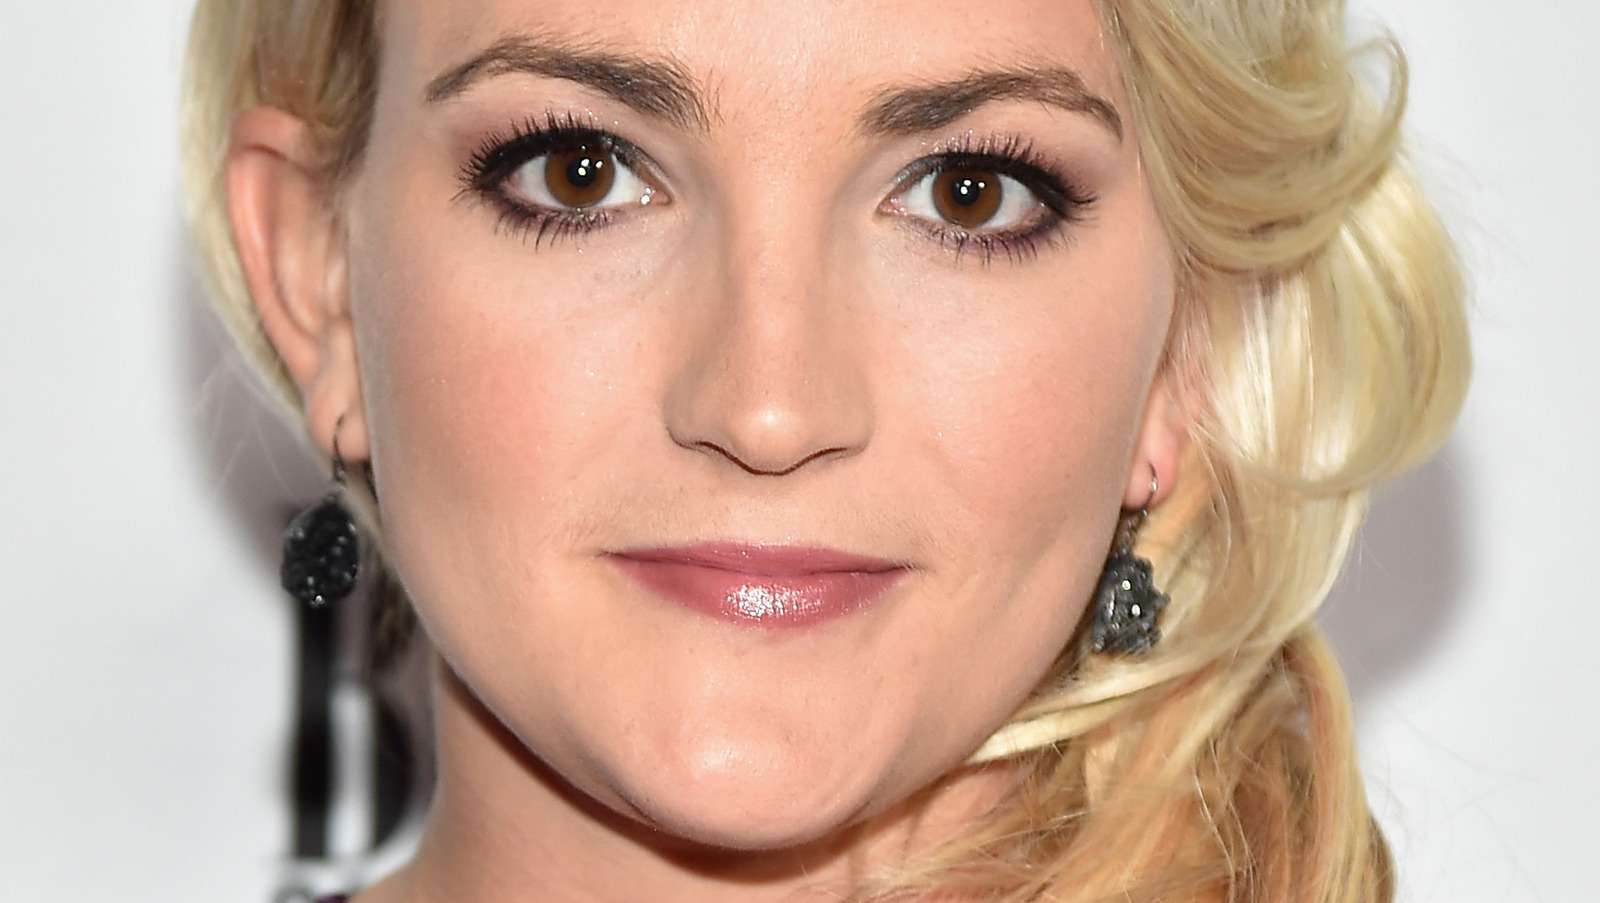 Does Jamie Lynn Spears Have A Plan For Her Hollywood Return?